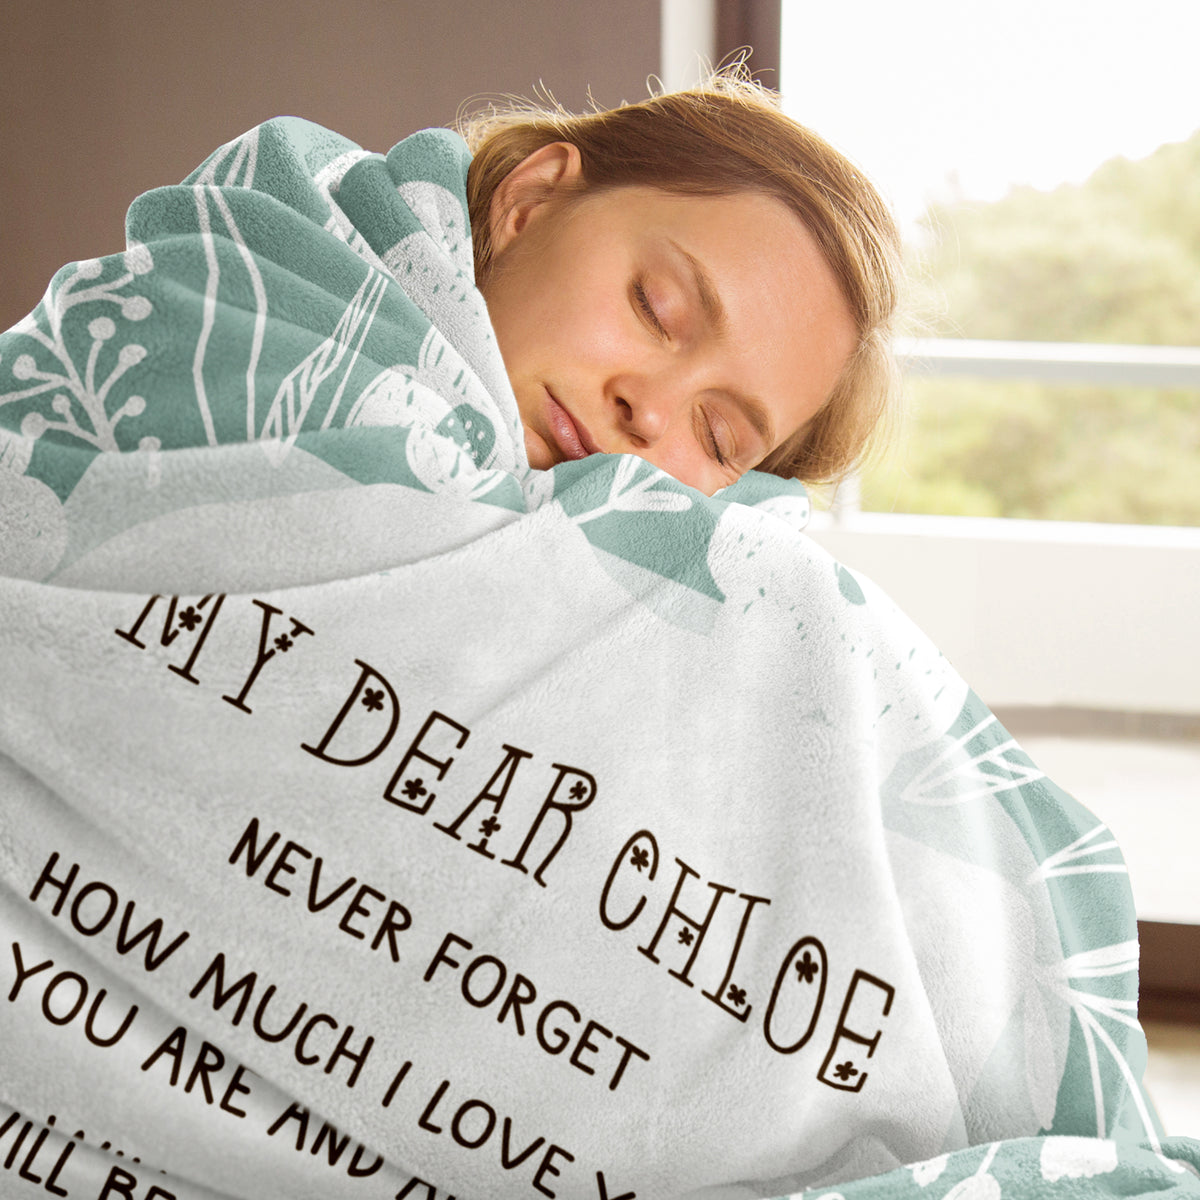 My Dear Children Custom Personalized Blanket Never Forget